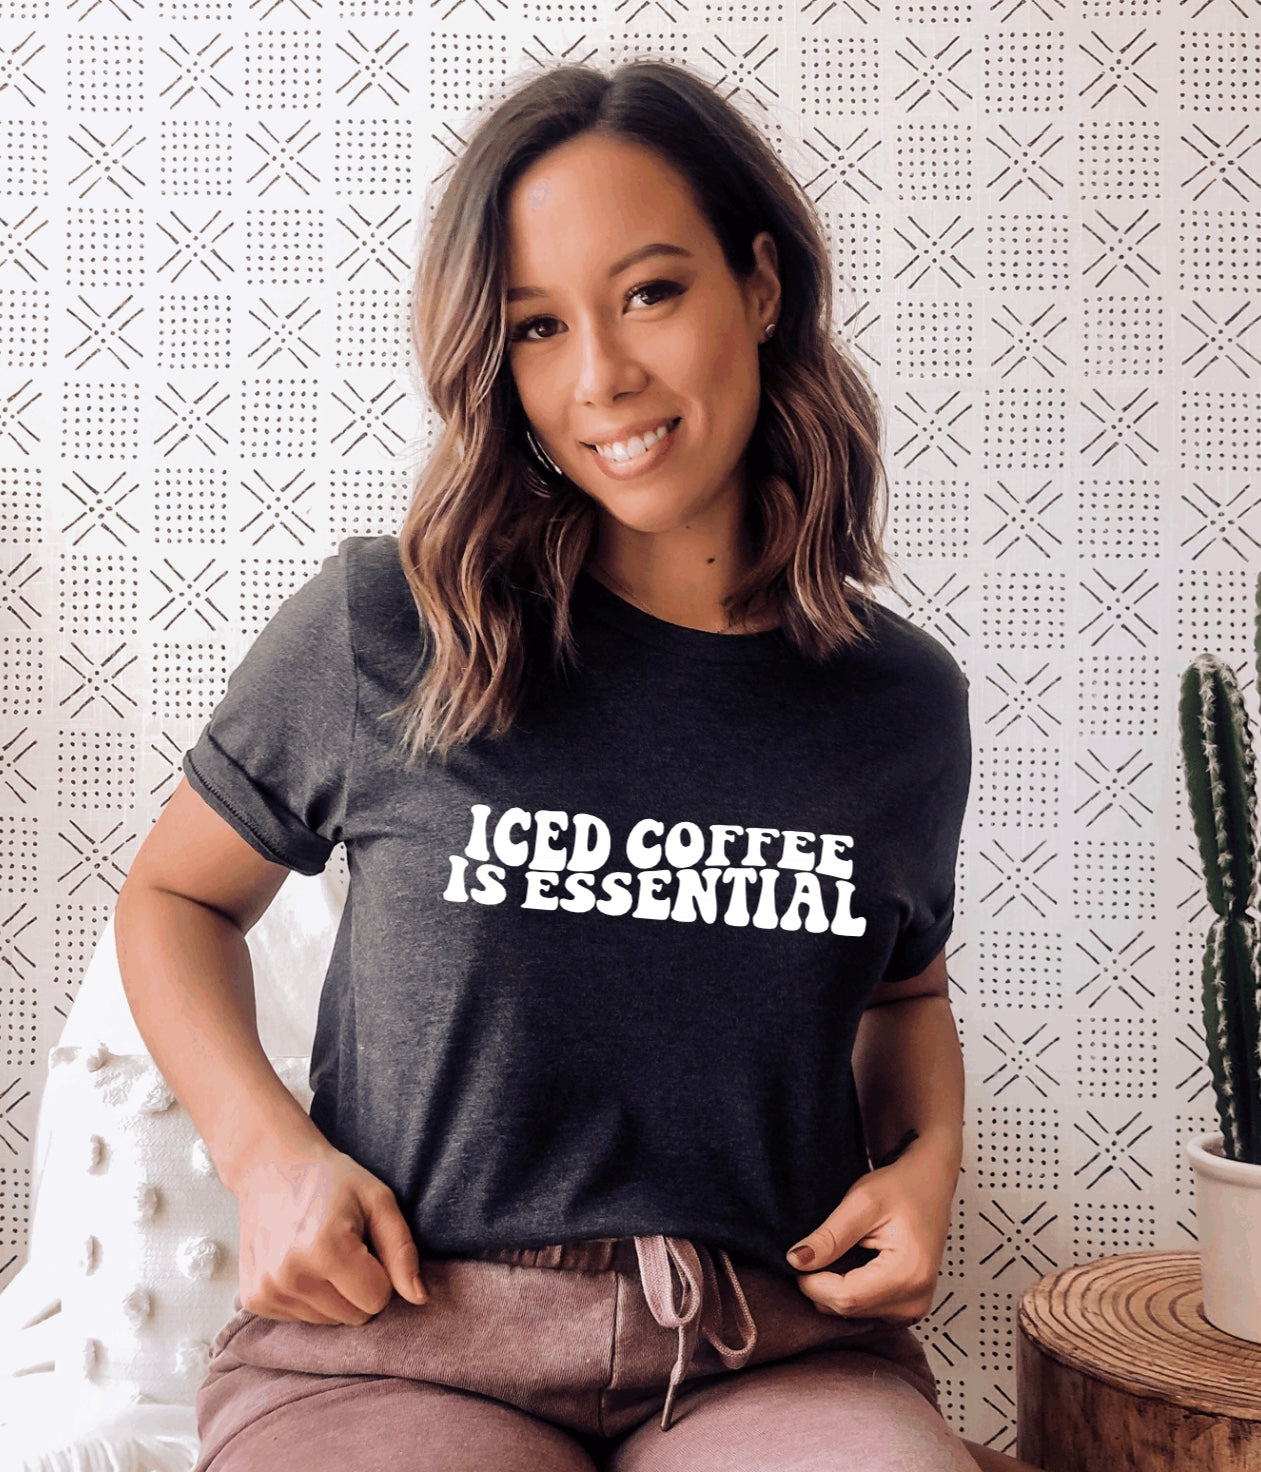 Iced Coffee is essential t-shirt 